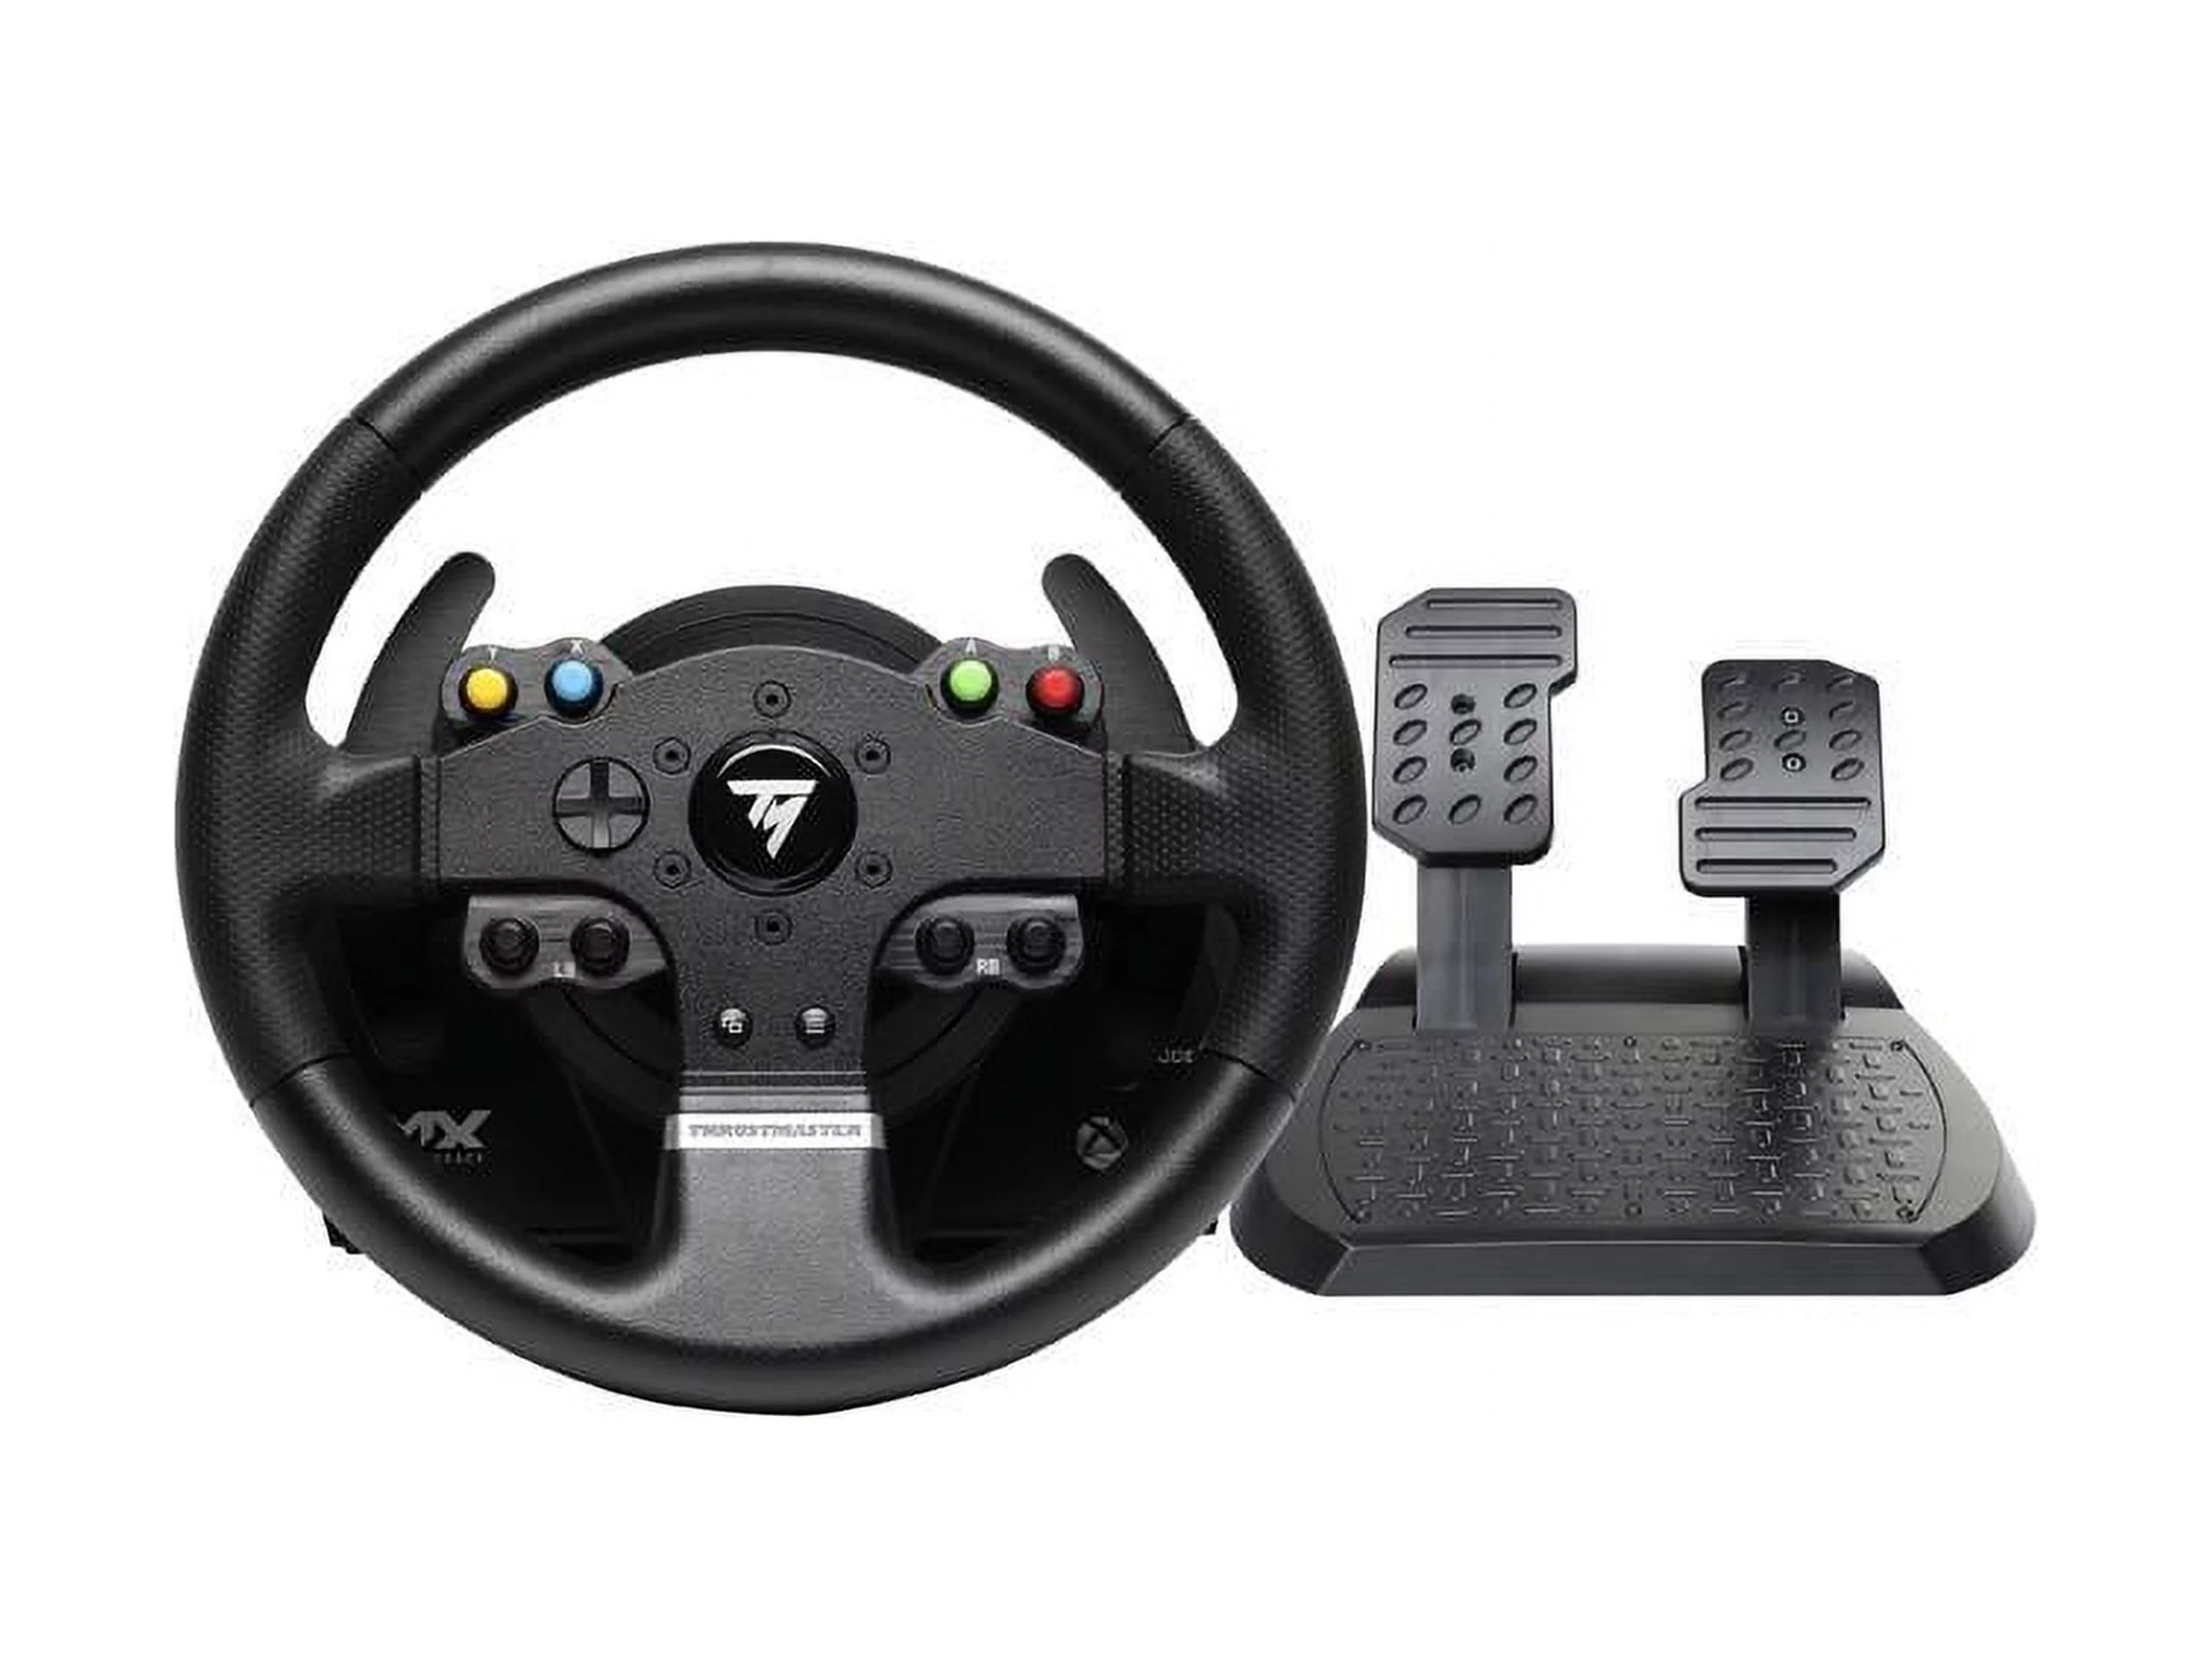 Which Racing Stand Is Compatible With Thrustmaster TMX Force Feedback Racing Wheel For Xbox One?